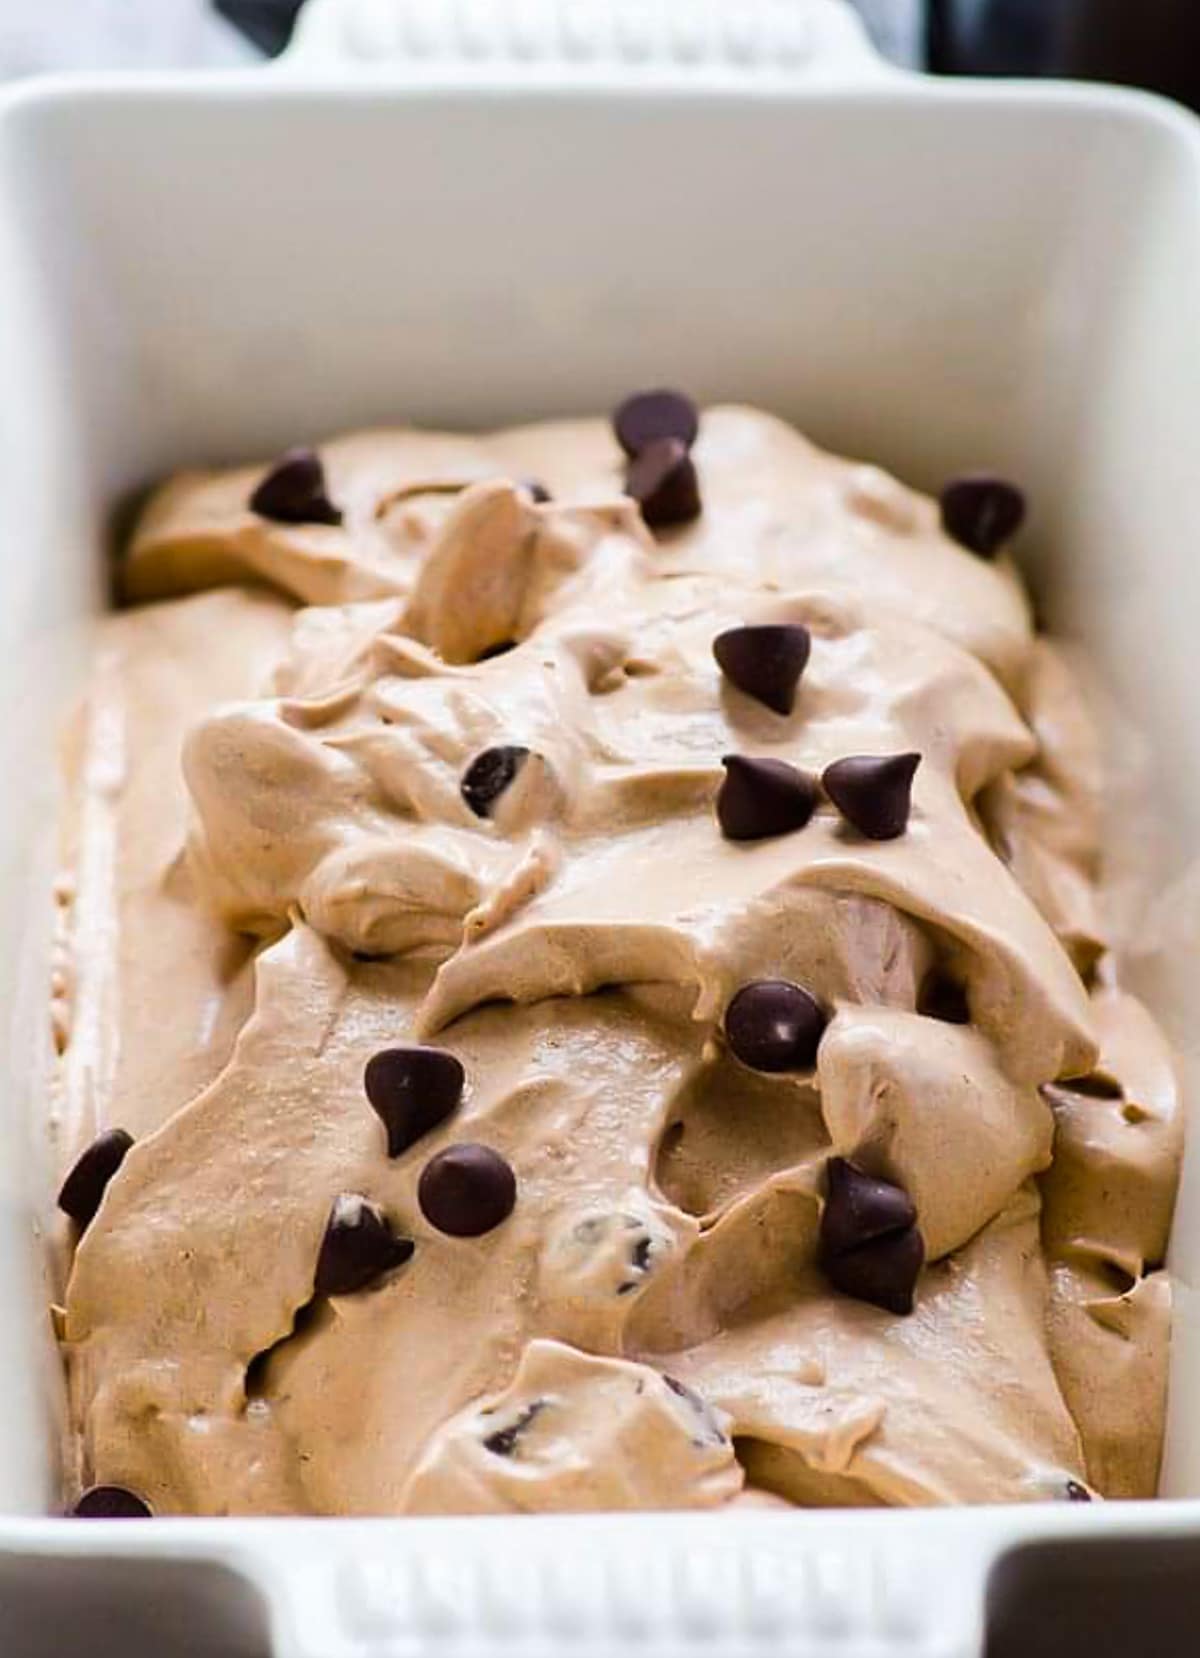 Healthy chocolate ice cream topped with chocolate chips in a ceramic dish.